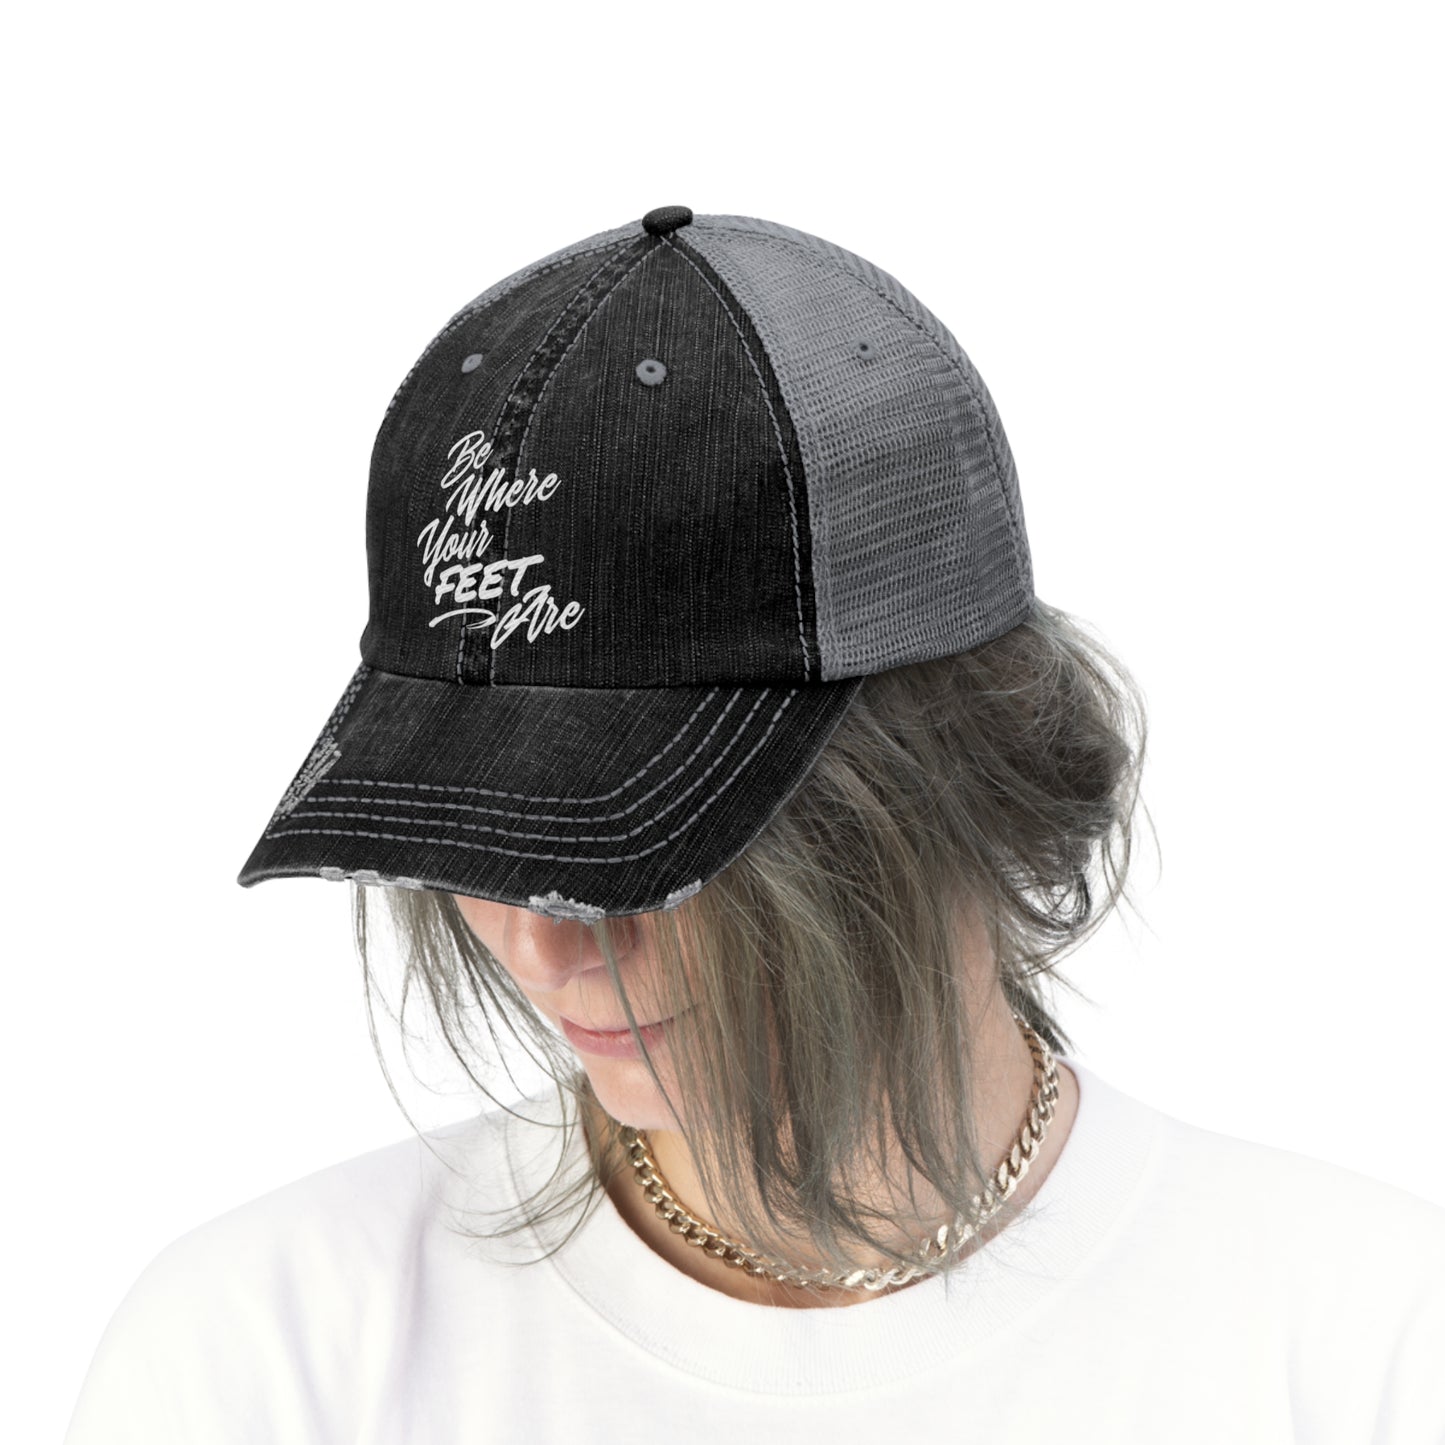 Be Where Your Feet Are Unisex Trucker Hat